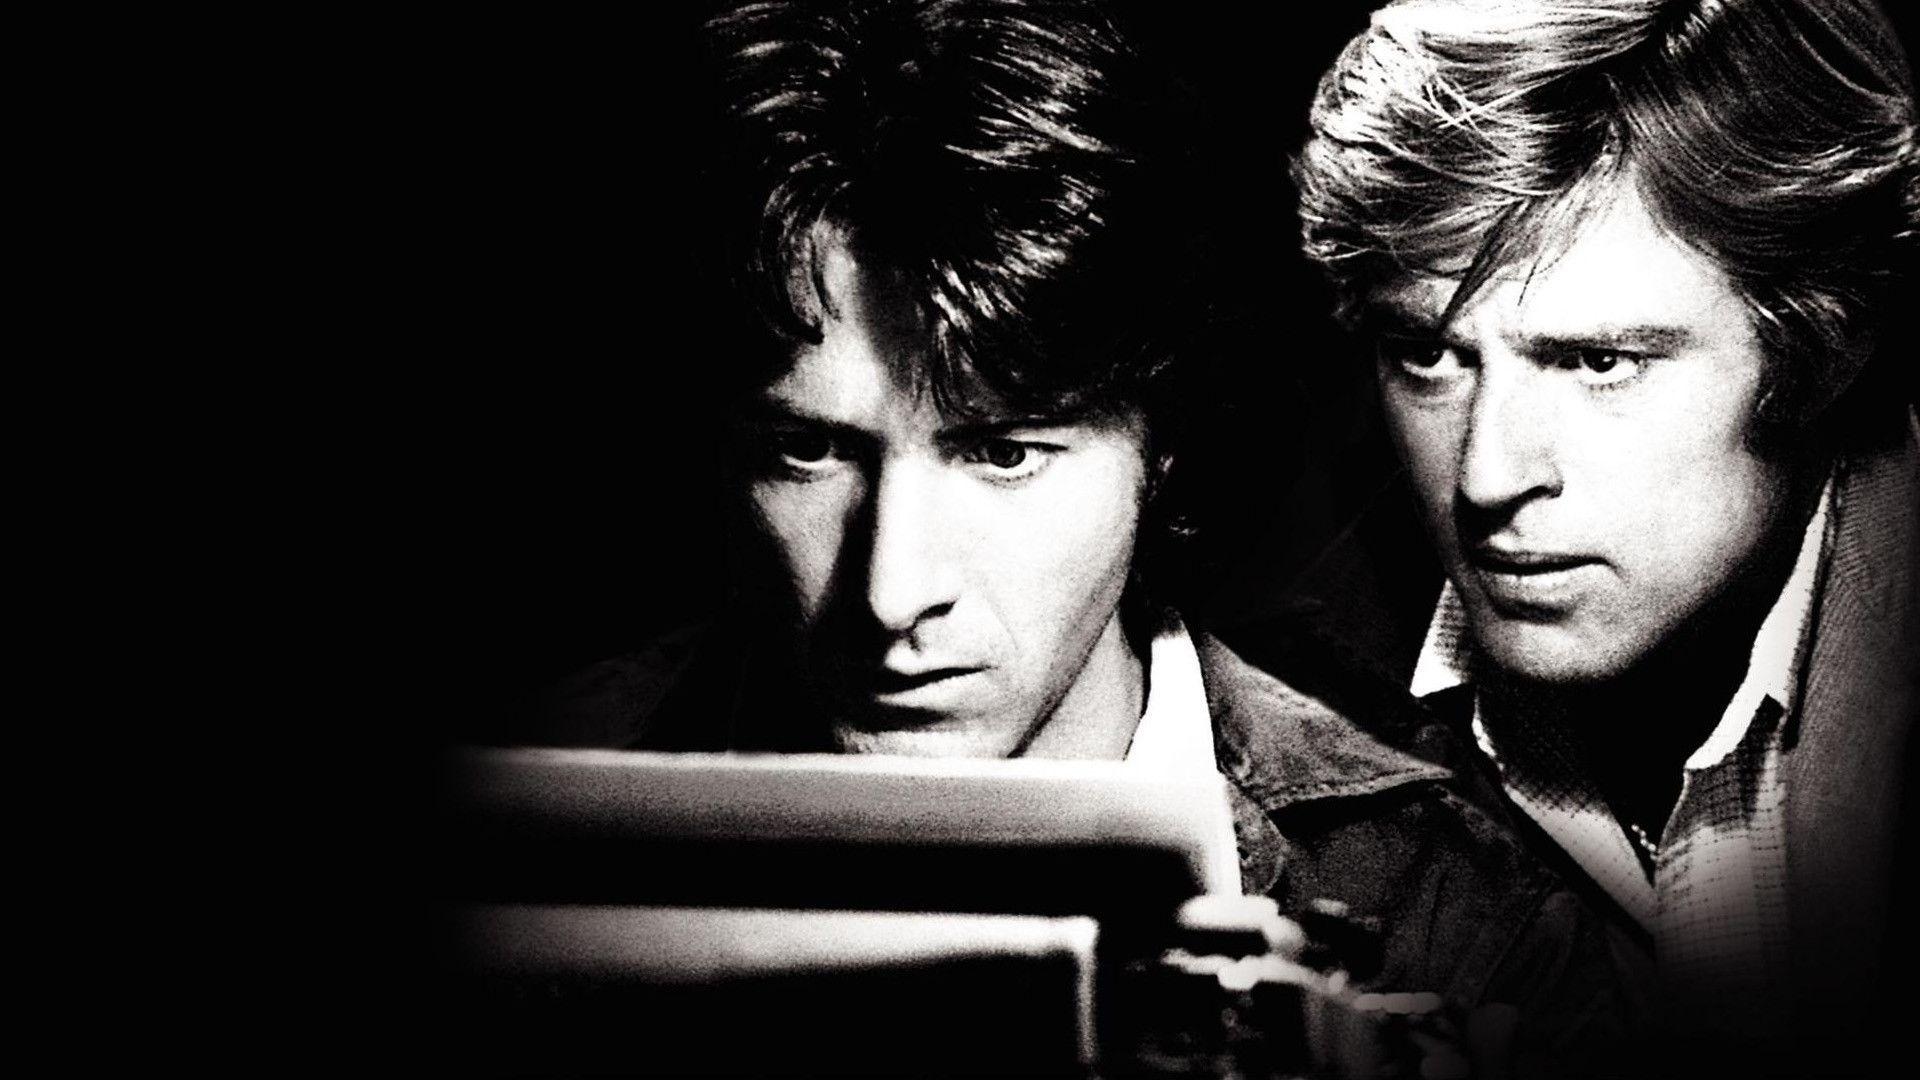 COMING: ALL THE PRESIDENT'S MEN, THE DOCUMENTARY